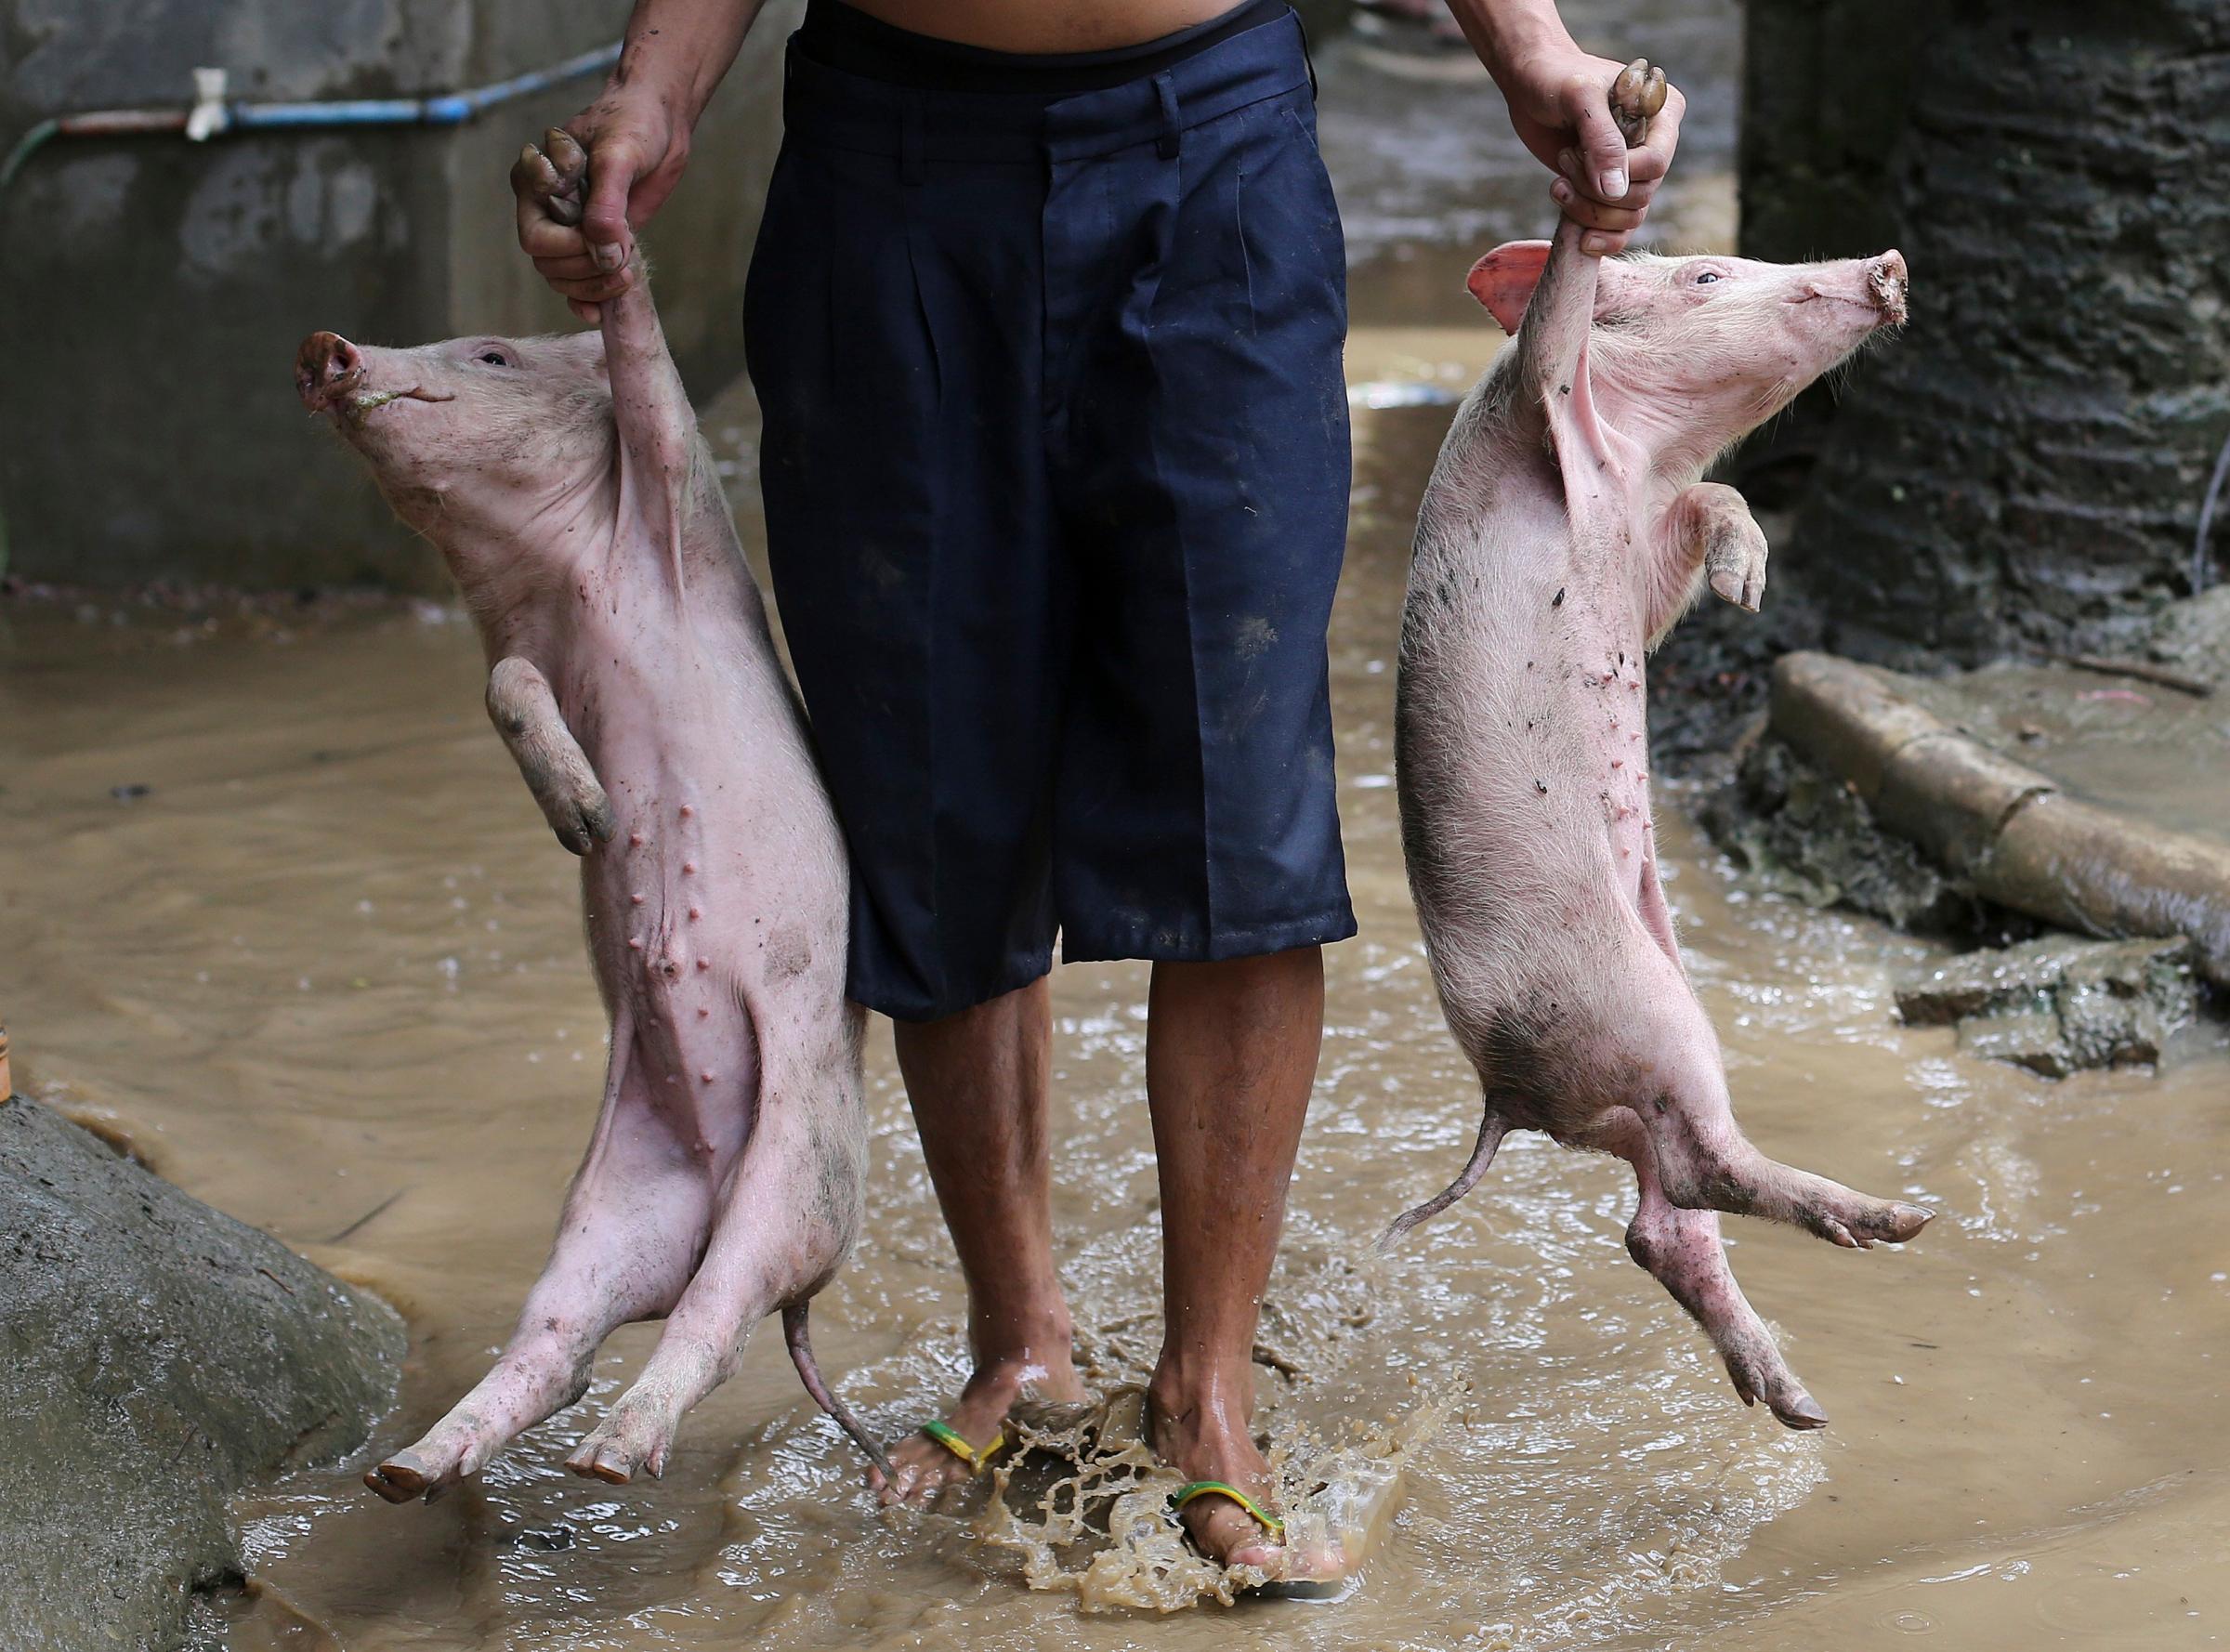 Piglets are carried over floodwaters by a resident as they return to their home after fleeing earlier due to a swollen river in suburban San Mateo, Rizal province, Philippines on Sept. 15, 2014.